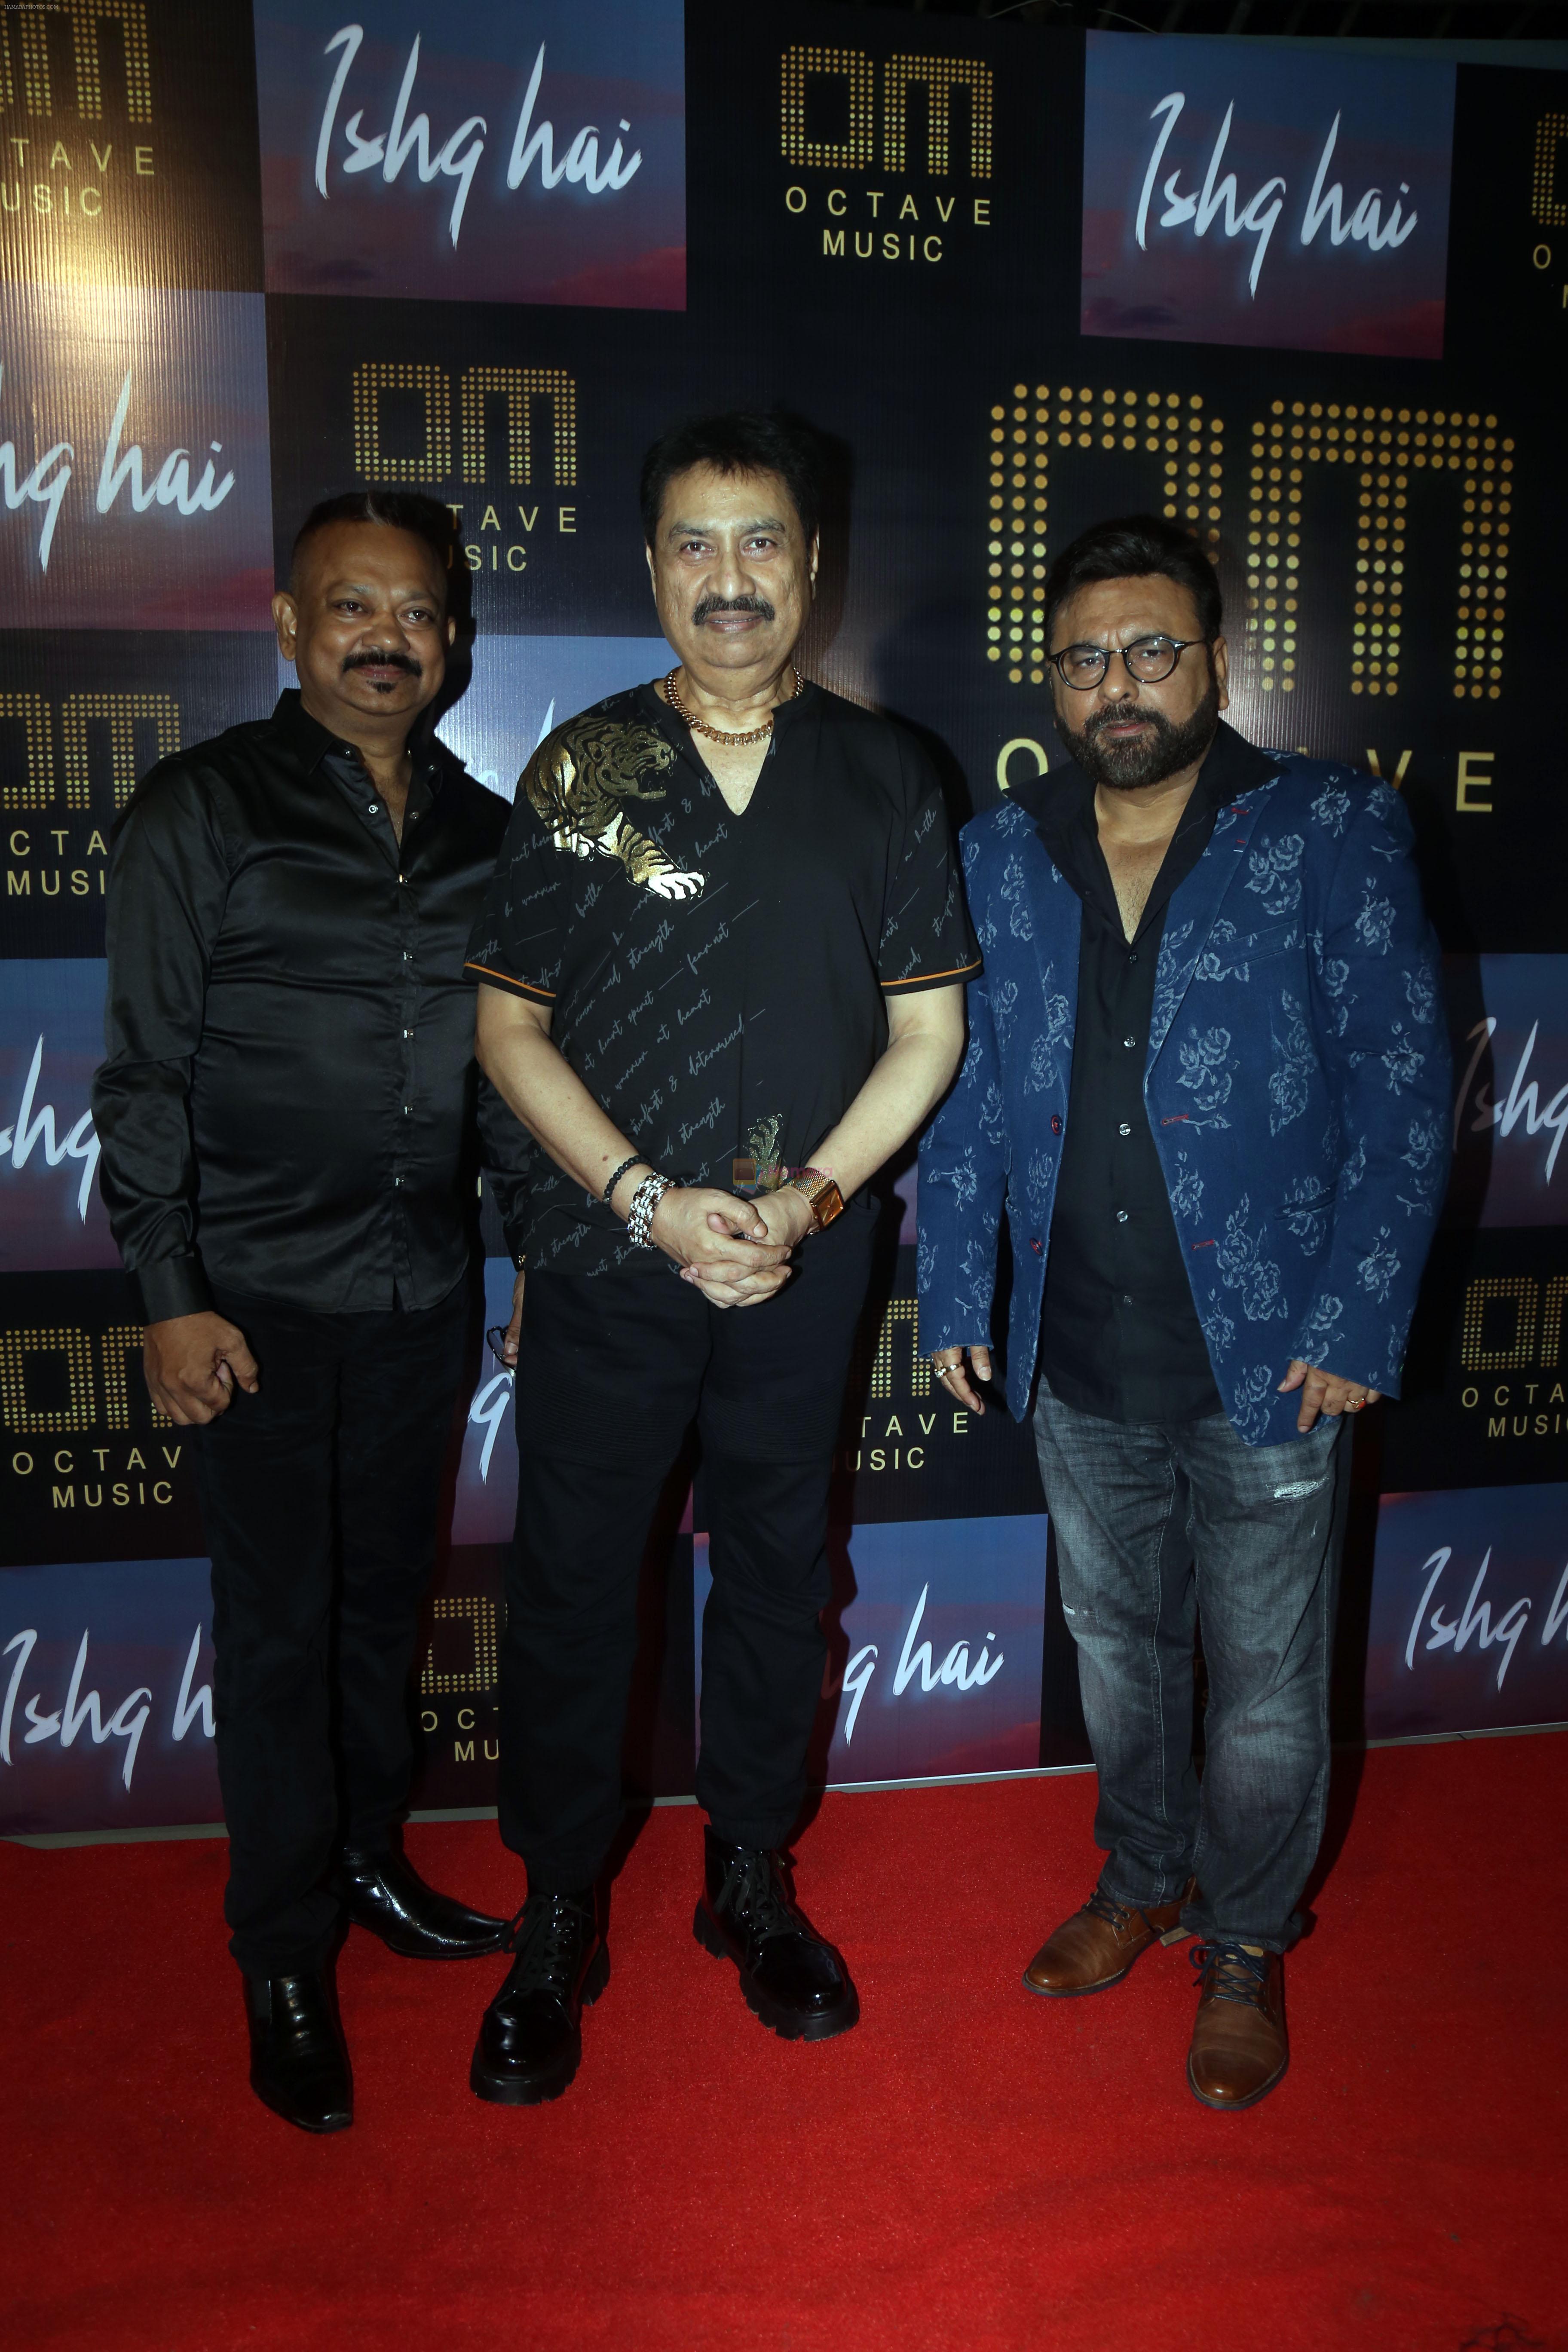 Kumar Sanu, Neeraj Mishra at the Launch of Octave Music and Ishq Hai Song on 22nd August 2023